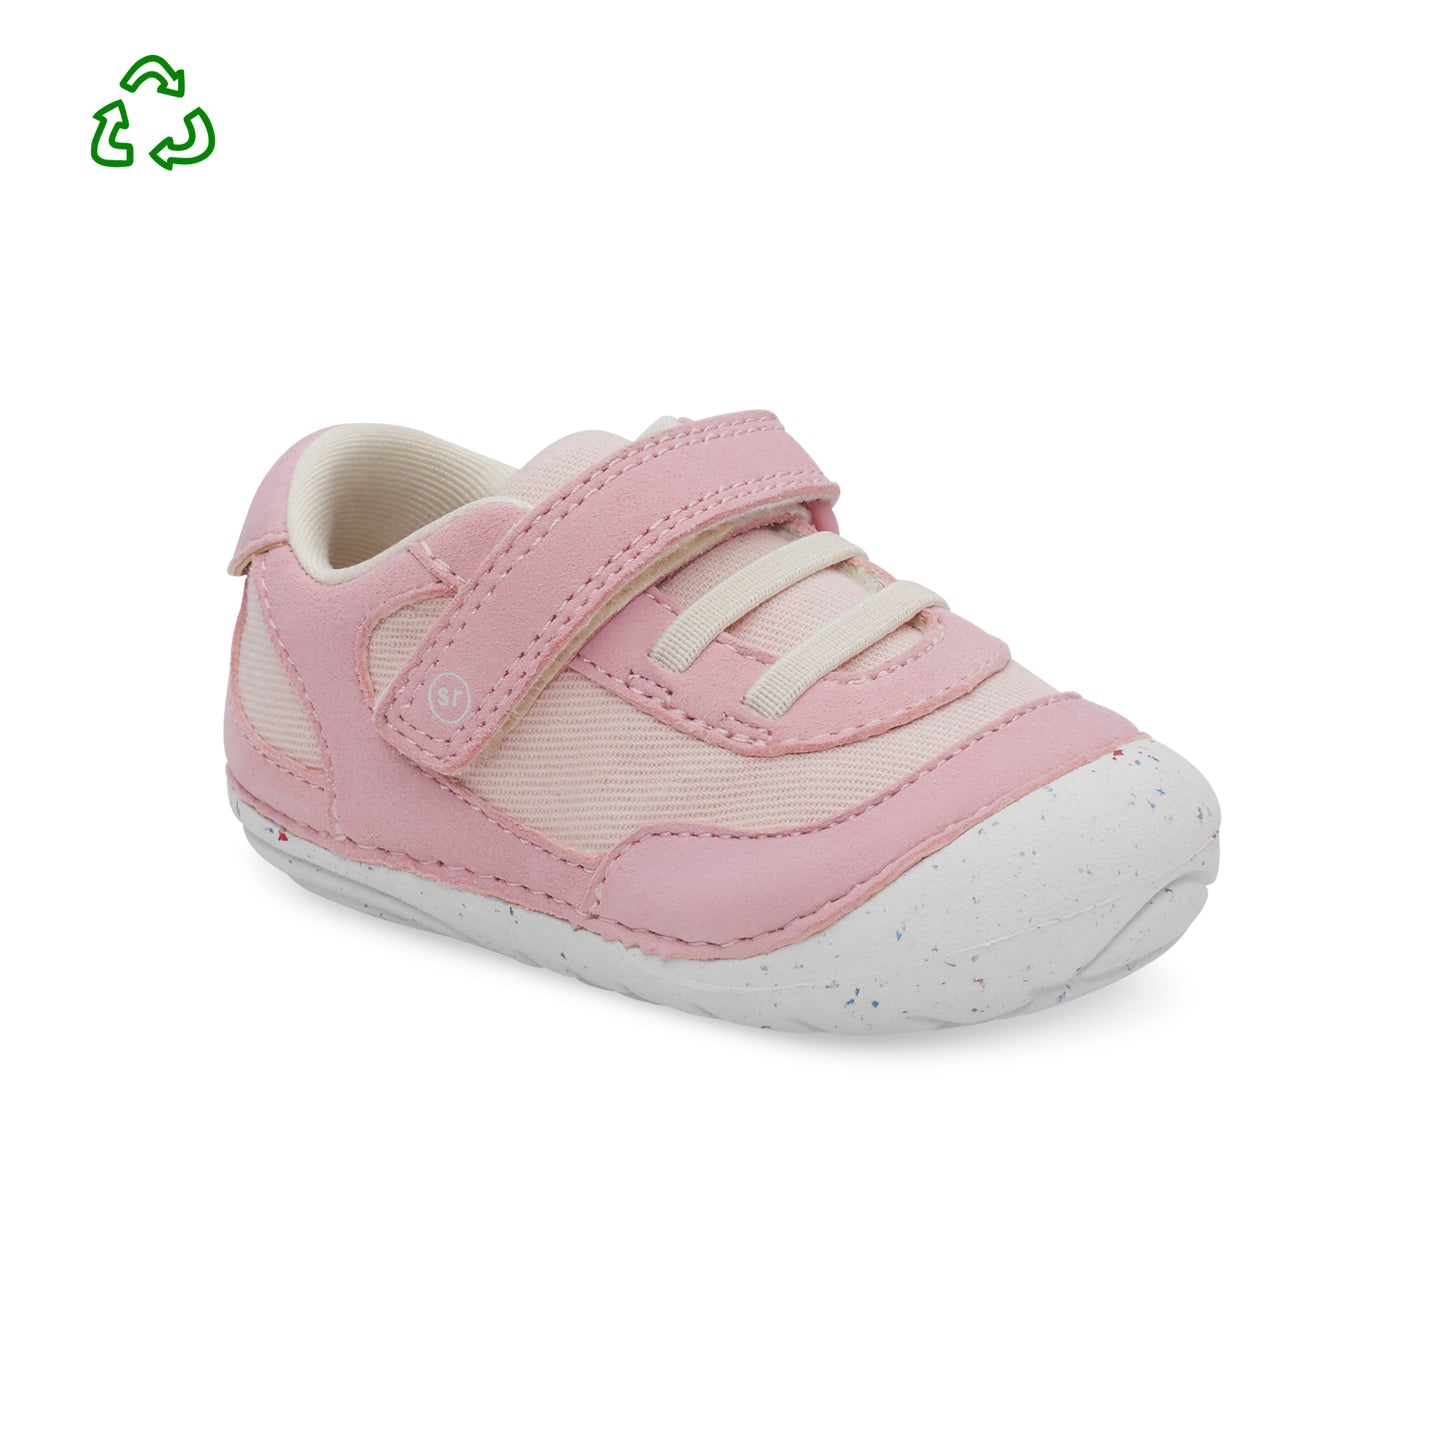 Eco-Friendly Pink Stride Rite Sprout Infant Walking Shoe Size 3-5 Medium and Wide Width